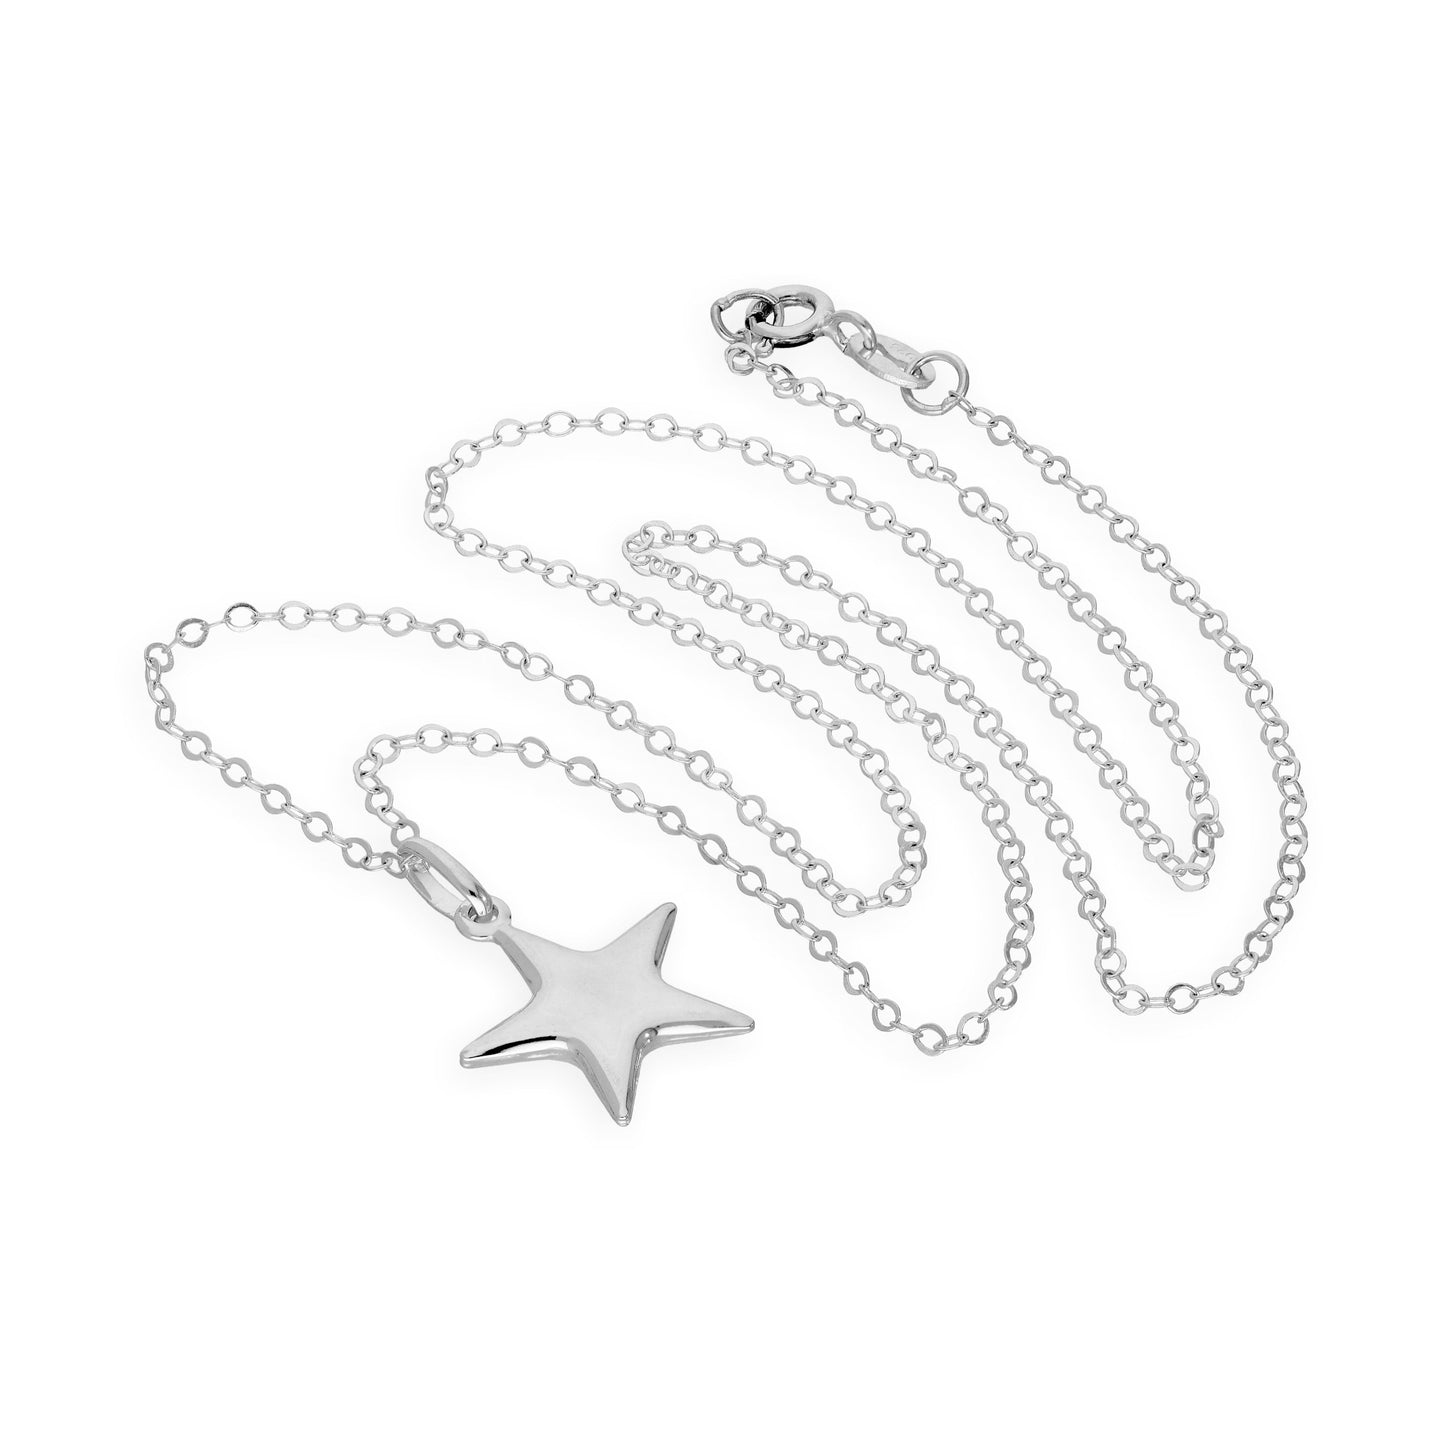 Sterling Silver Star Pendant Necklace 16 - 22 Inches